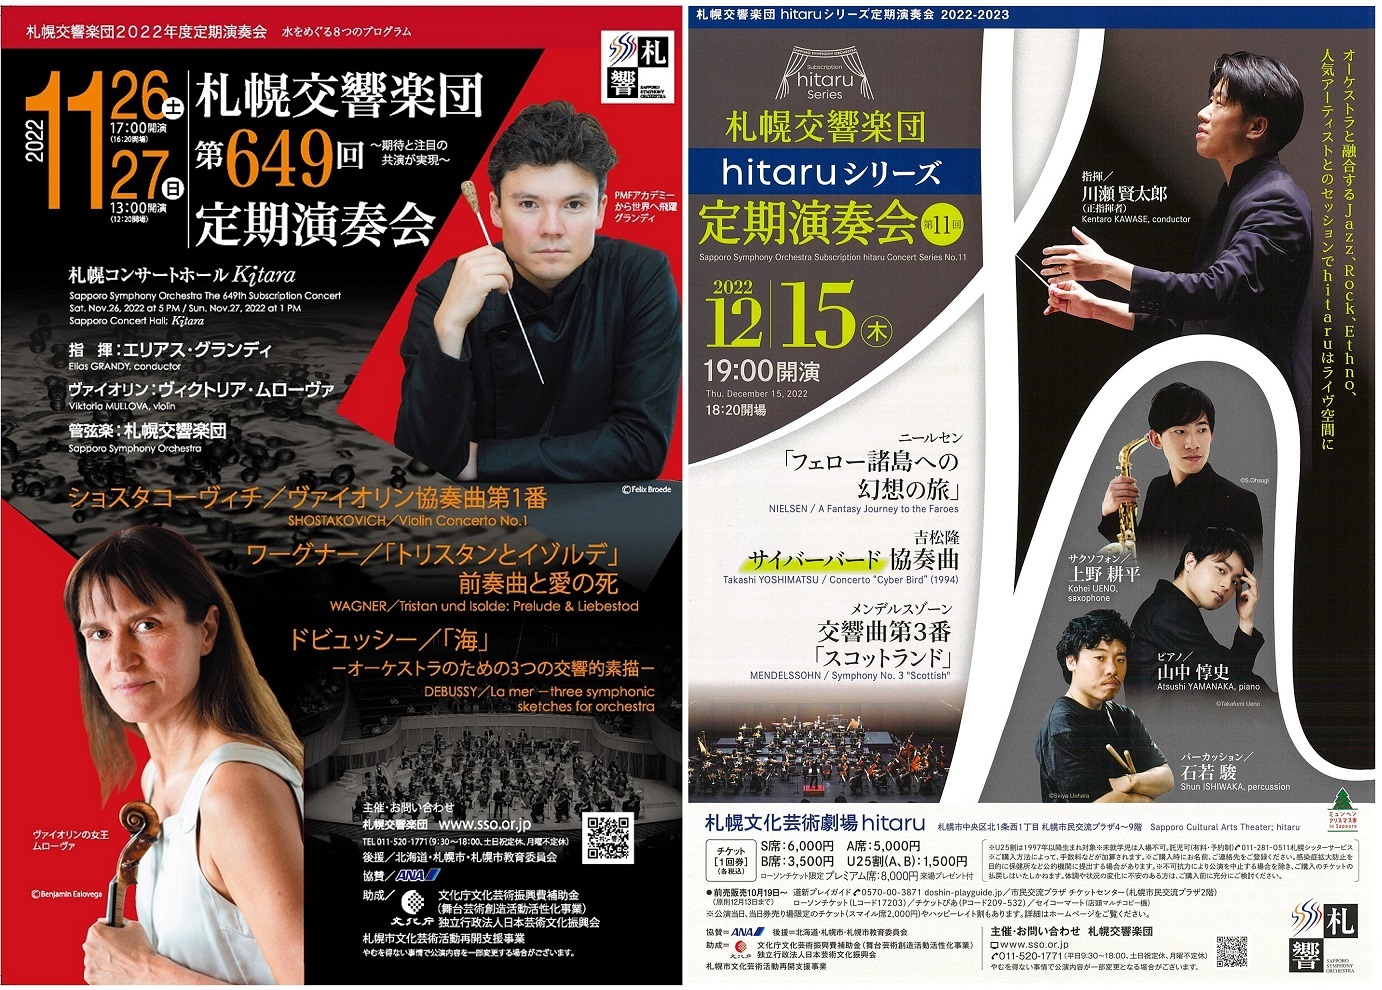 【Ticket Sales in October 2022】Sakkyo Sponsored Concerts – Subscription, hitaru, the Ninth and other cities in Hokkaido